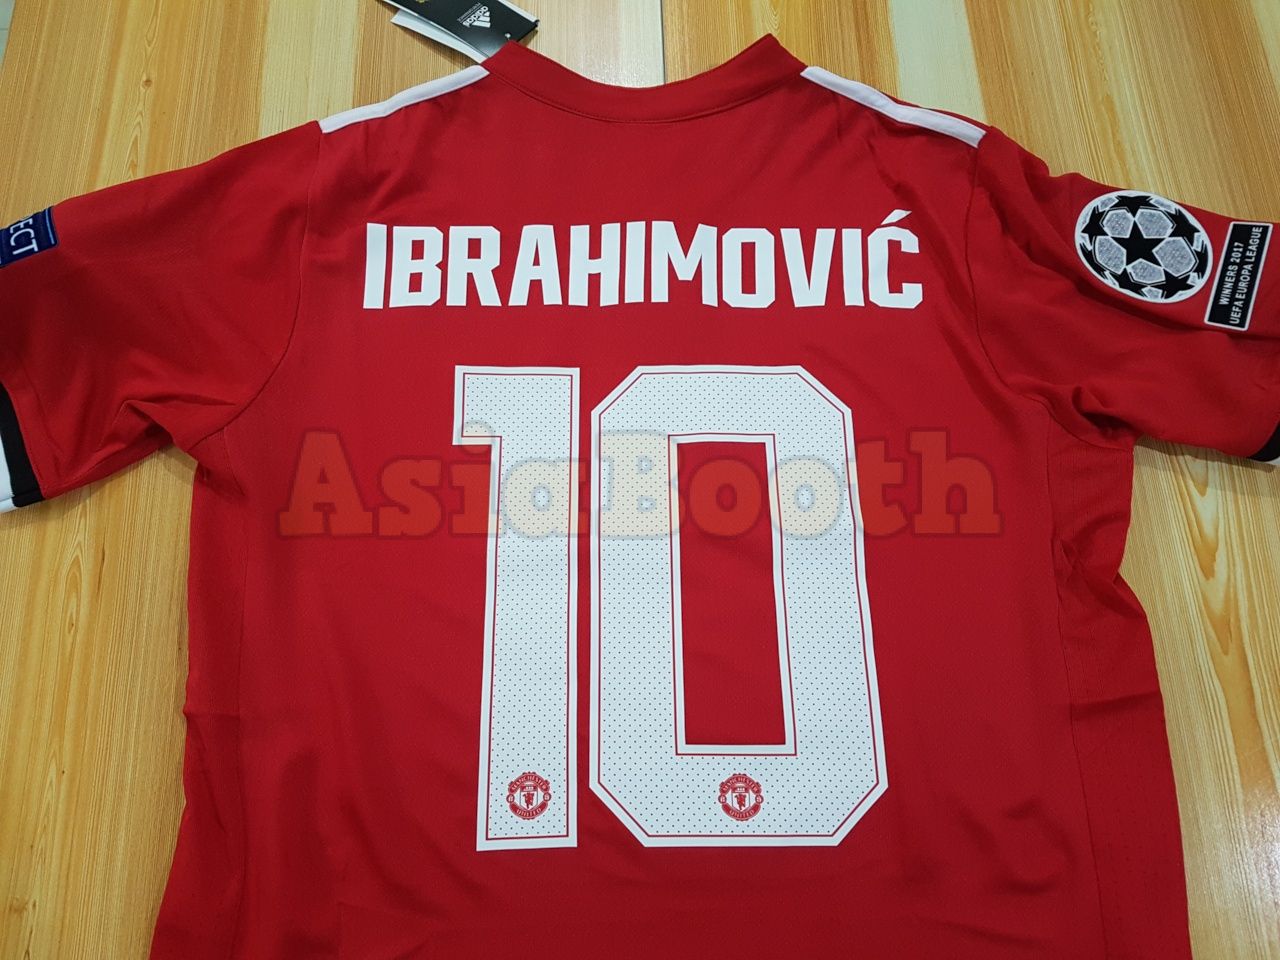 manchester united ucl jersey